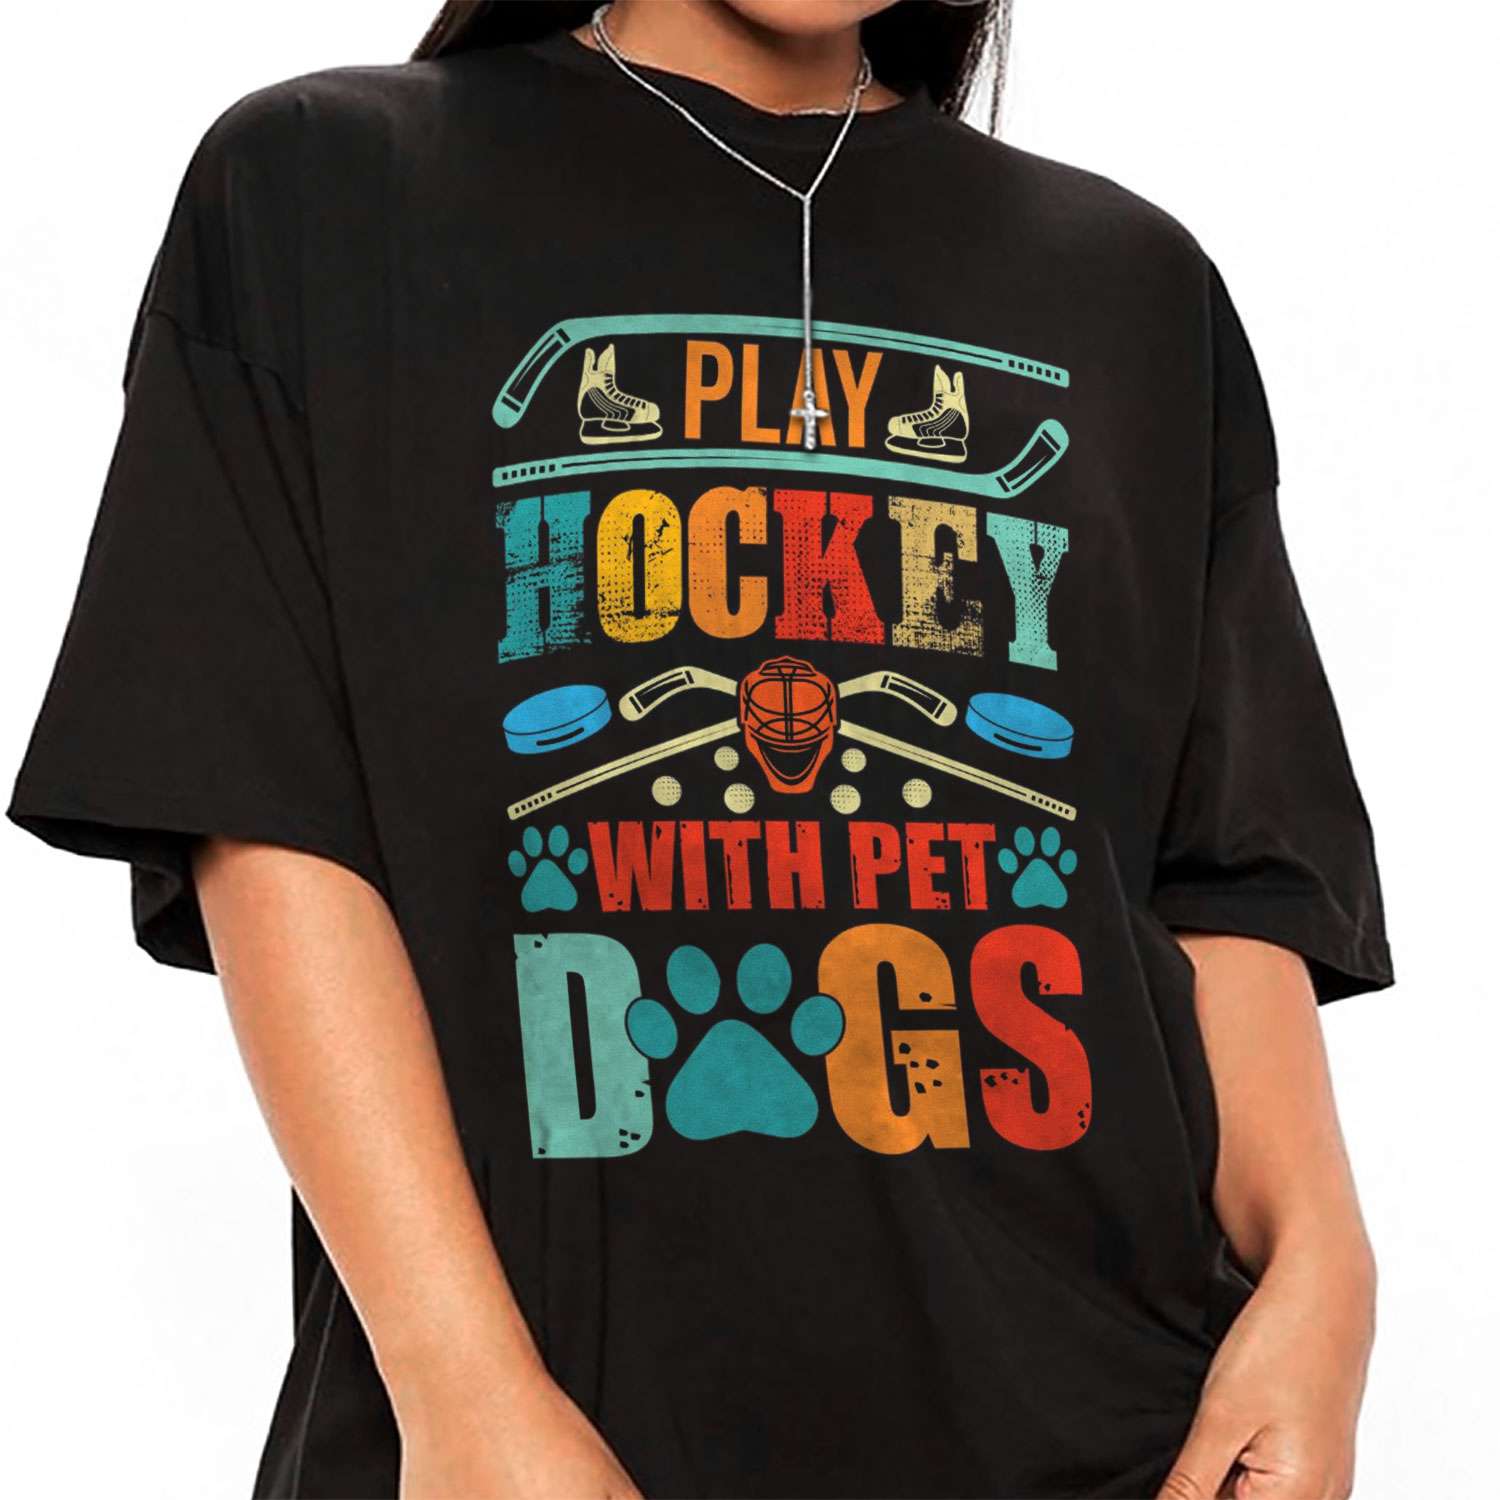 Play Hockey With Pet Dogs T-shirt